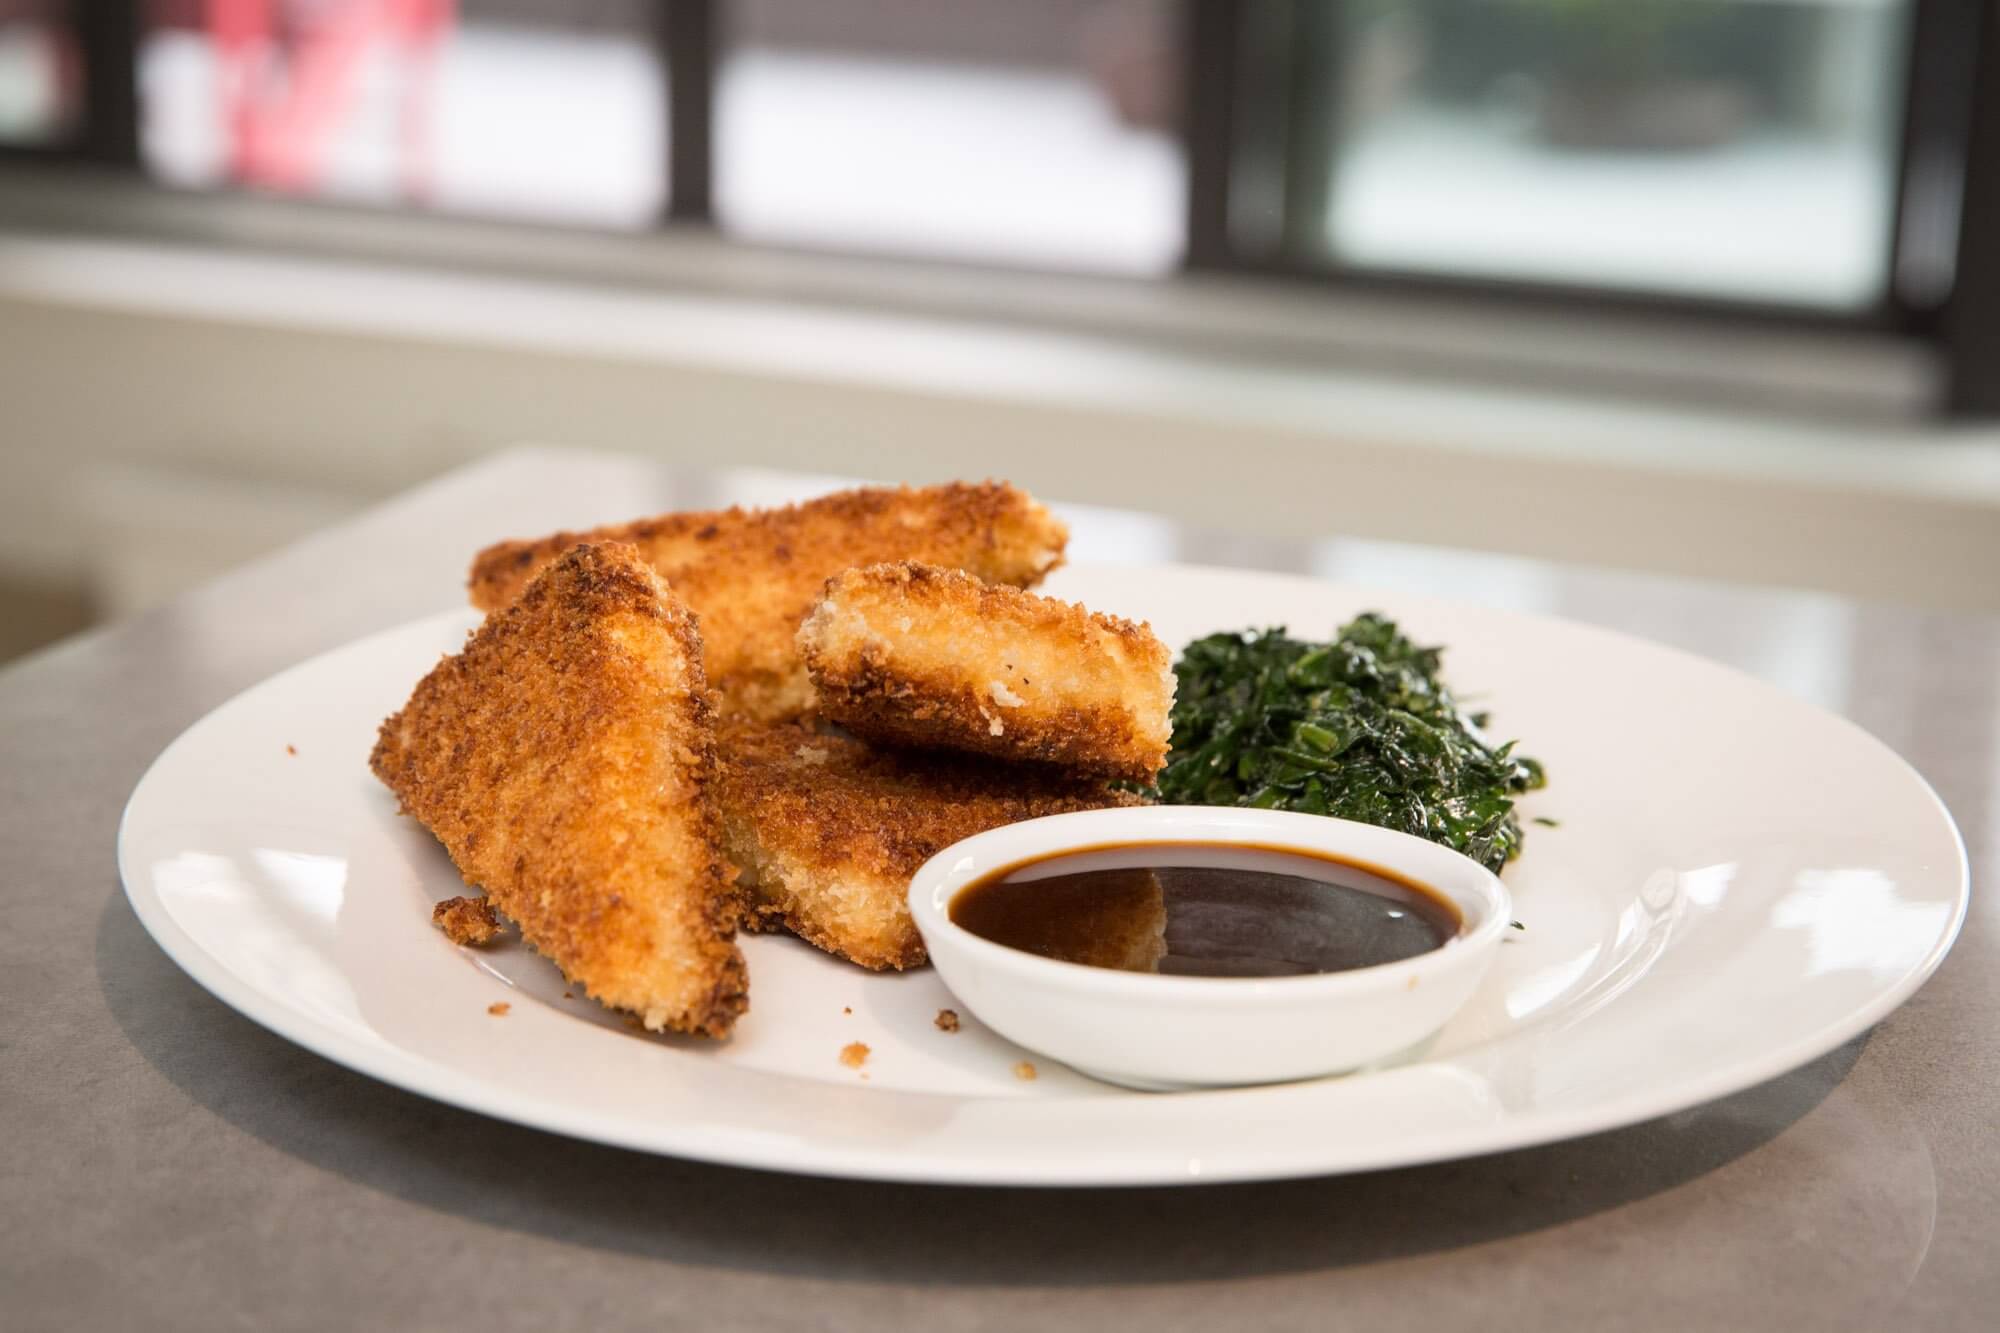 Crispy fried breaded tofu with hoisin dipping sauce and spinach